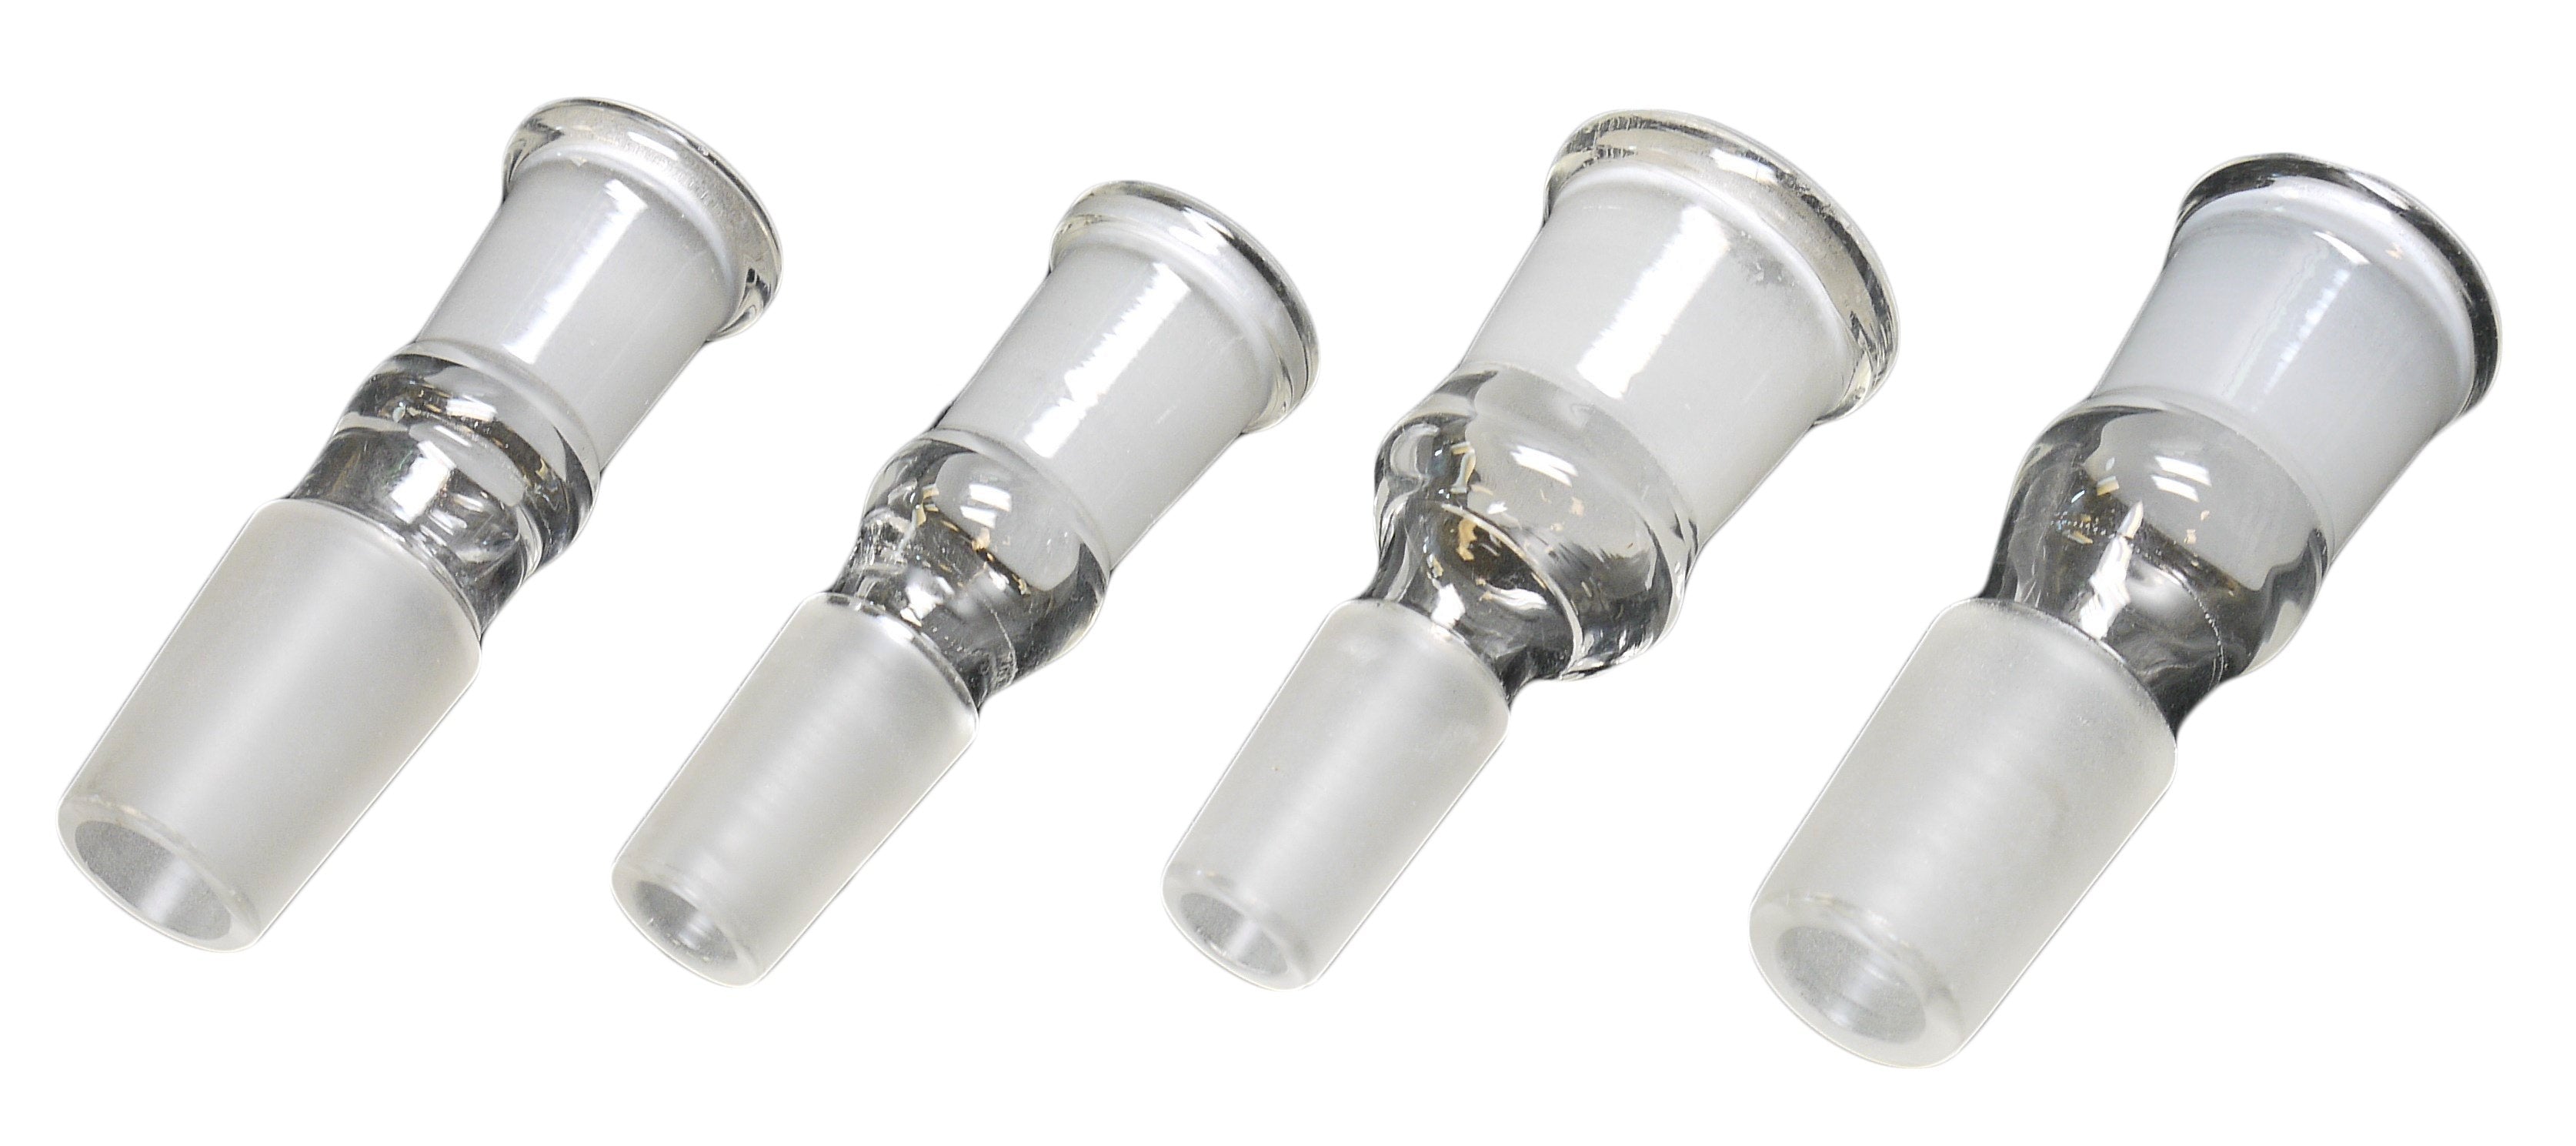 Male to Male connector 19mm to 19mm